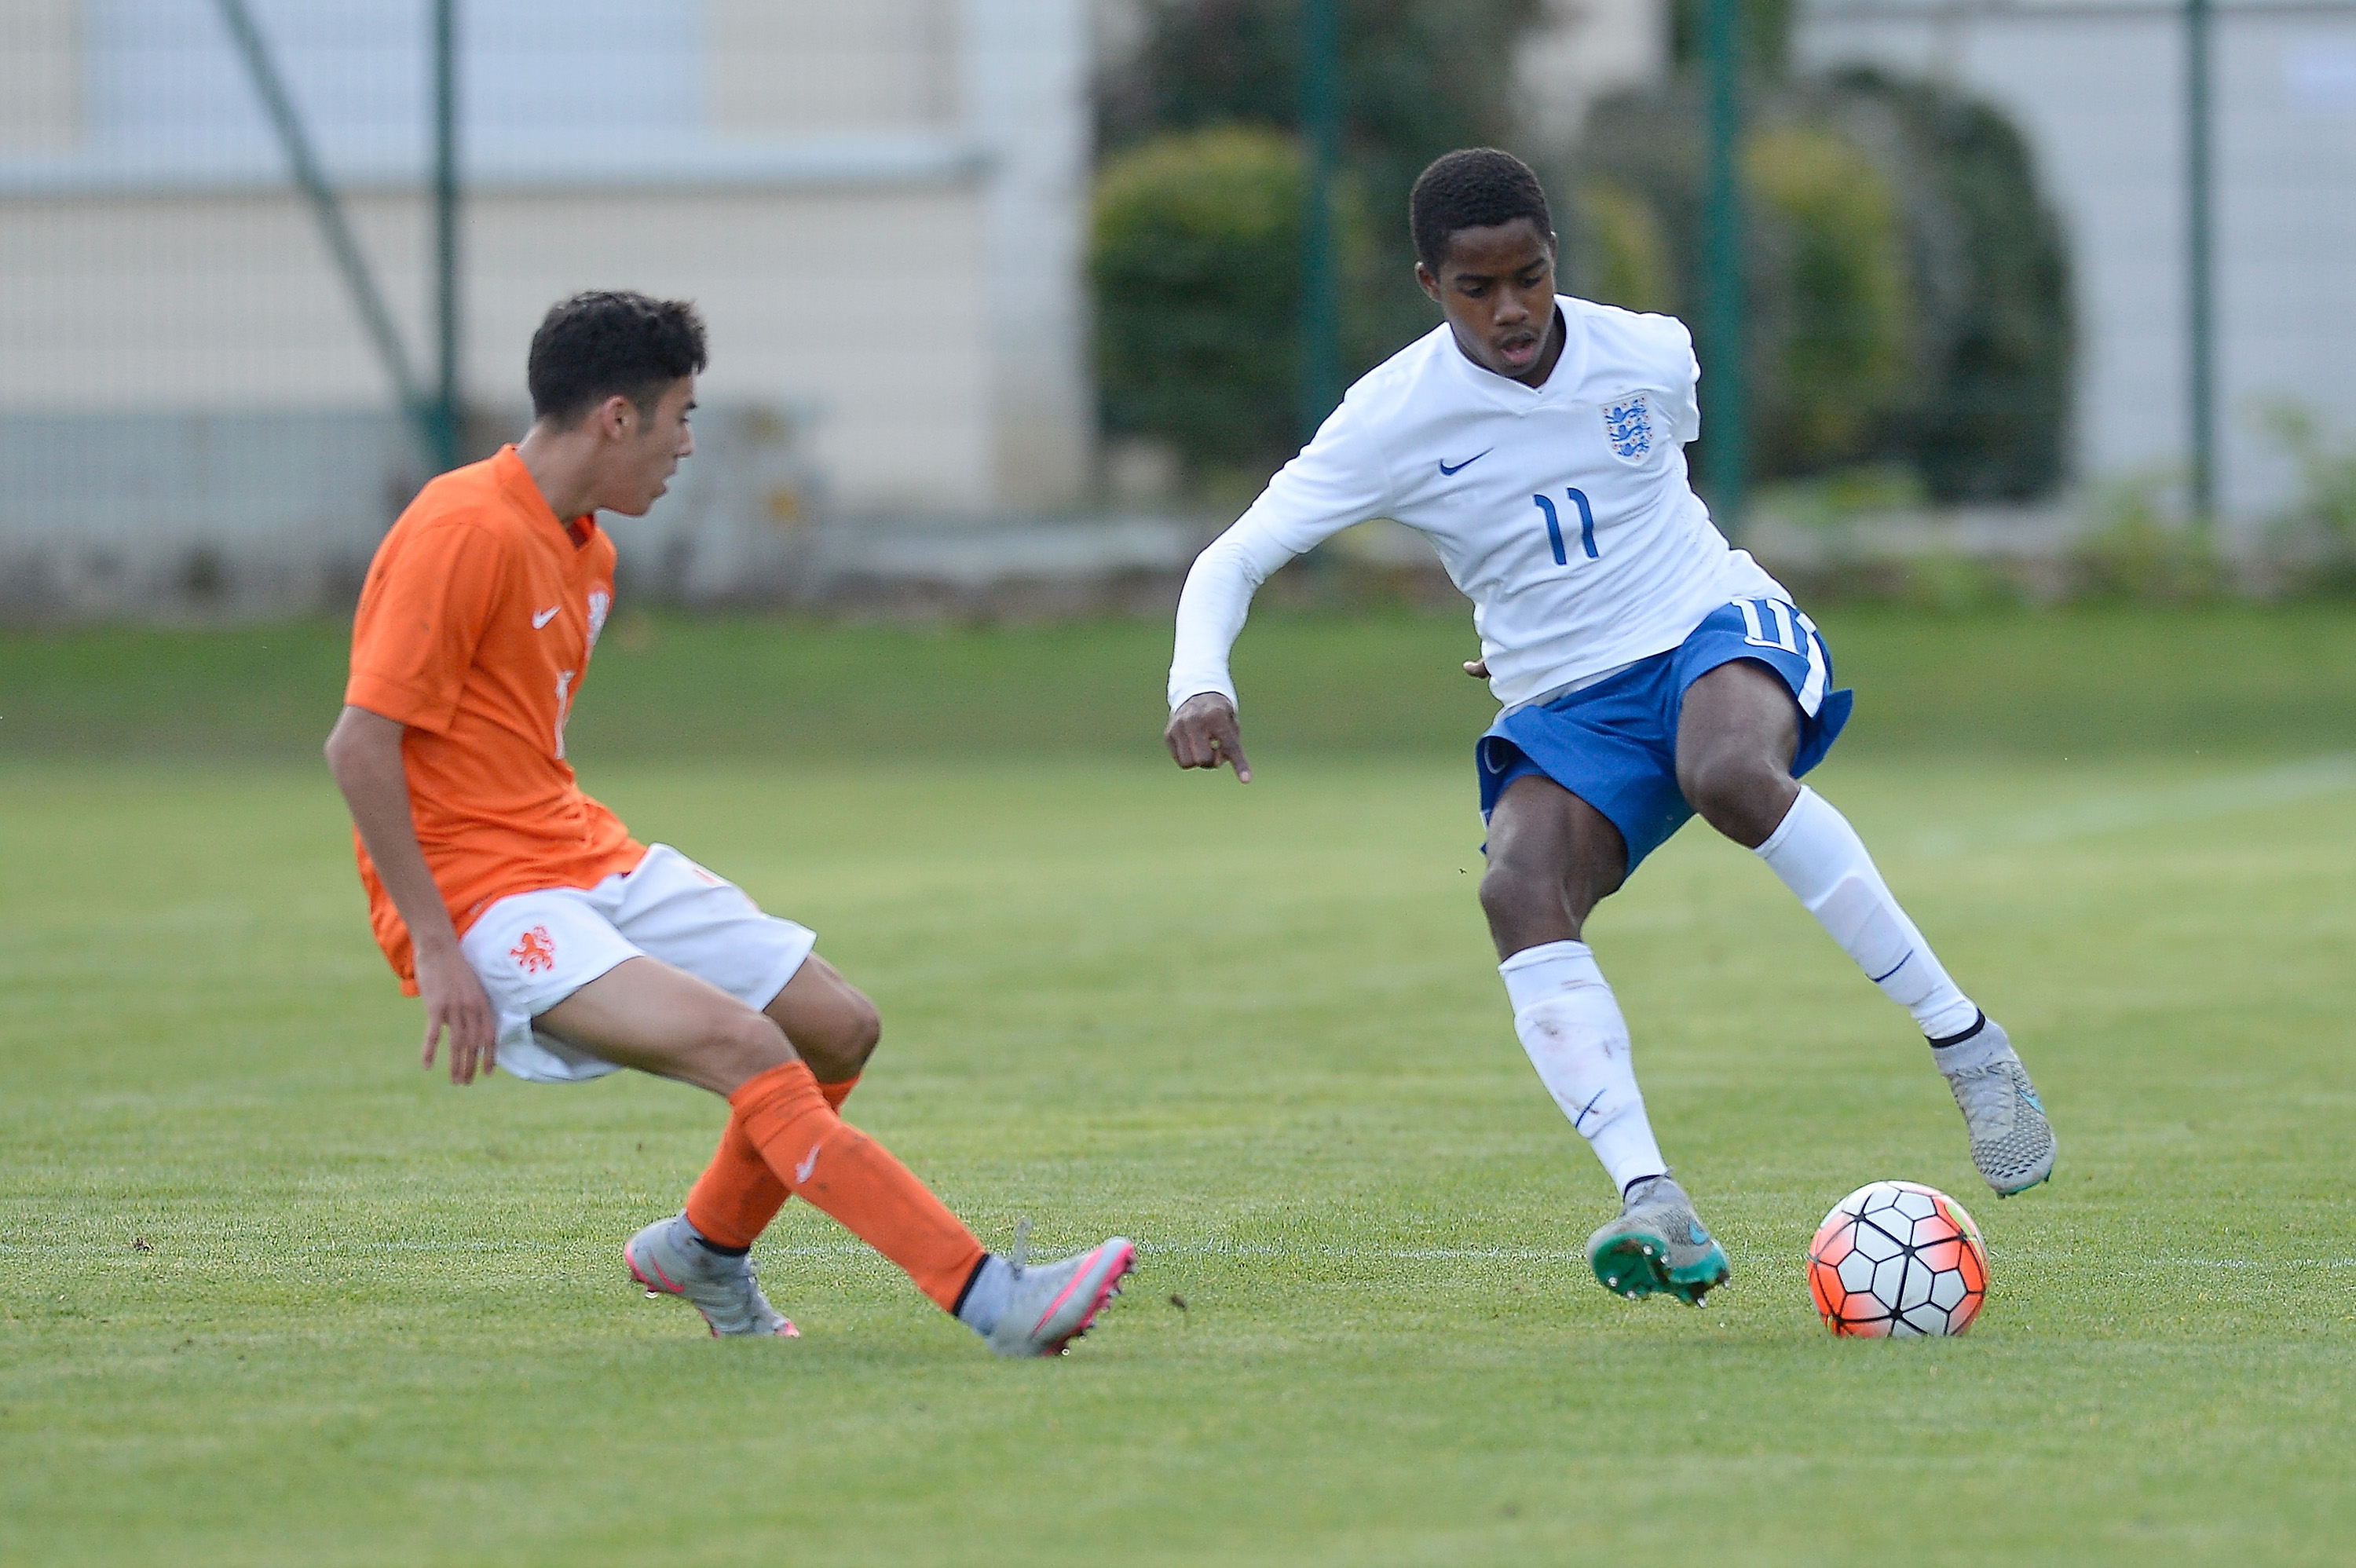 BOISSY-SAINT-LEGER, FRANCE - OCTOBER 29:  Ryan Sessegnon of England in action during the Tournoi International game between England U16 and the Netherlands U16  on October 29, 2015 in Boissy-Saint-Leger, France.  (Photo by Aurelien Meunier/Getty Images)